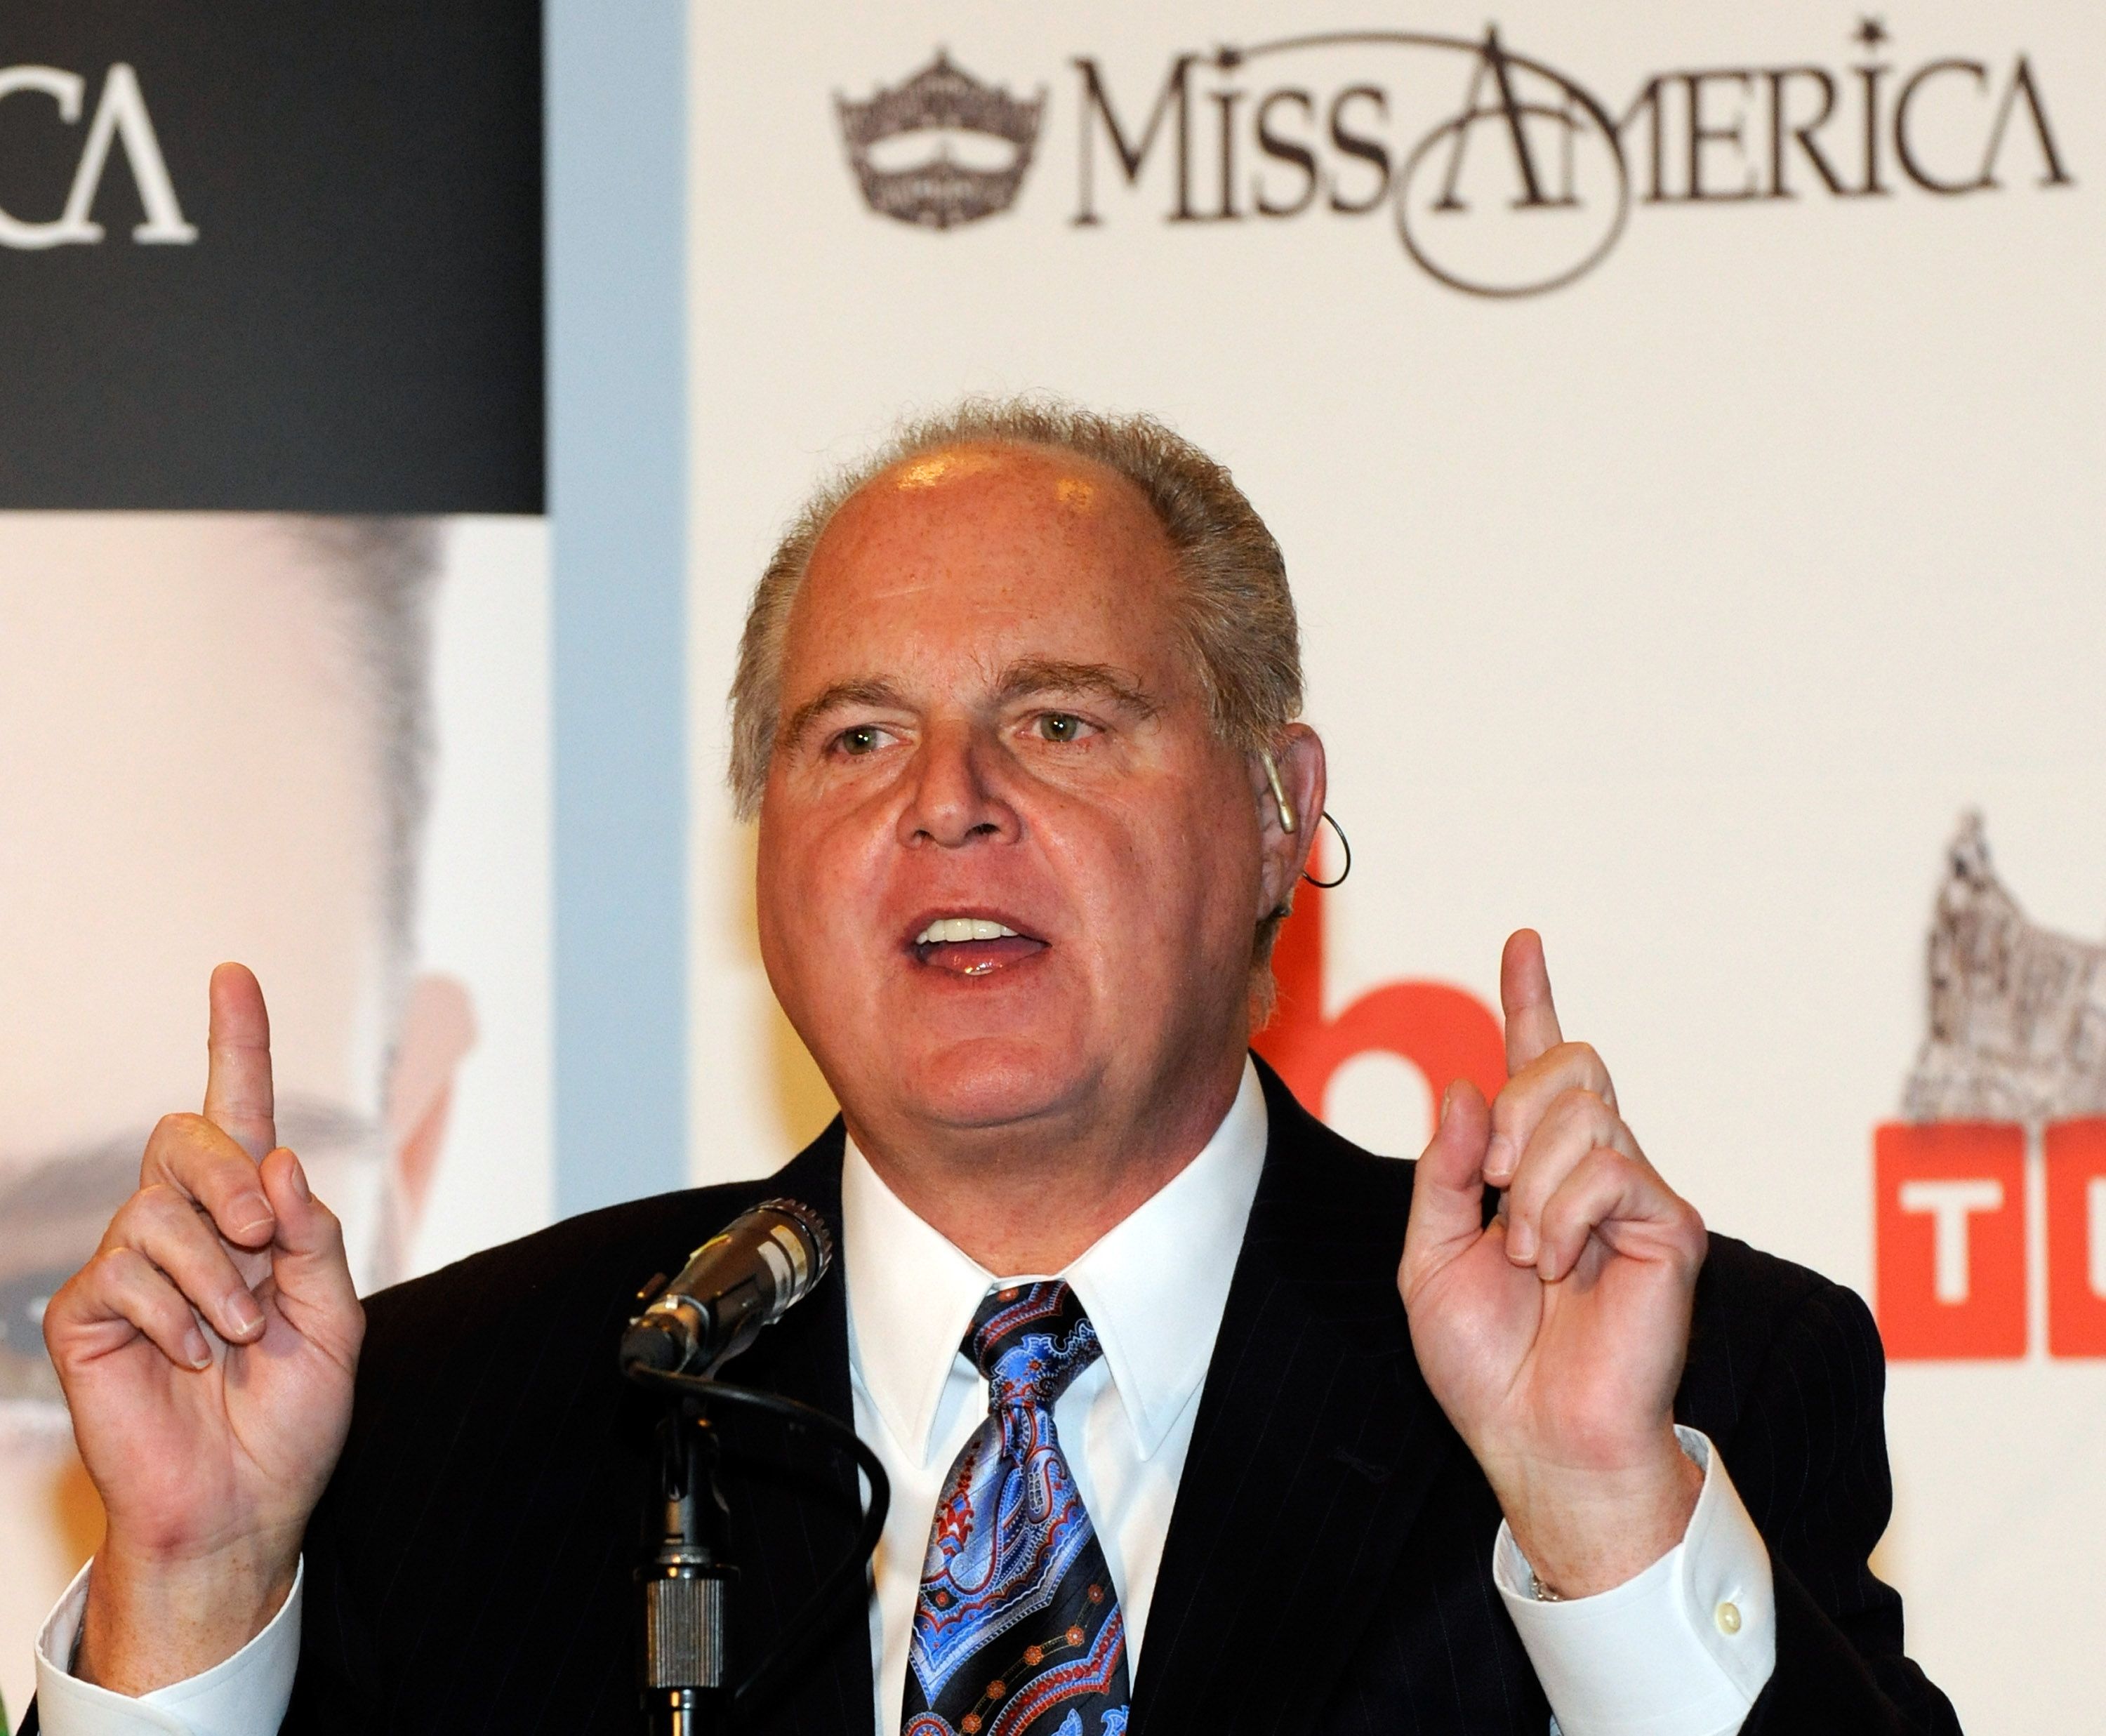 Rush Limbaugh during a conference for Miss America Pageant judges on January 27, 2010, in Las Vegas, Nevada. | Source: Getty Images